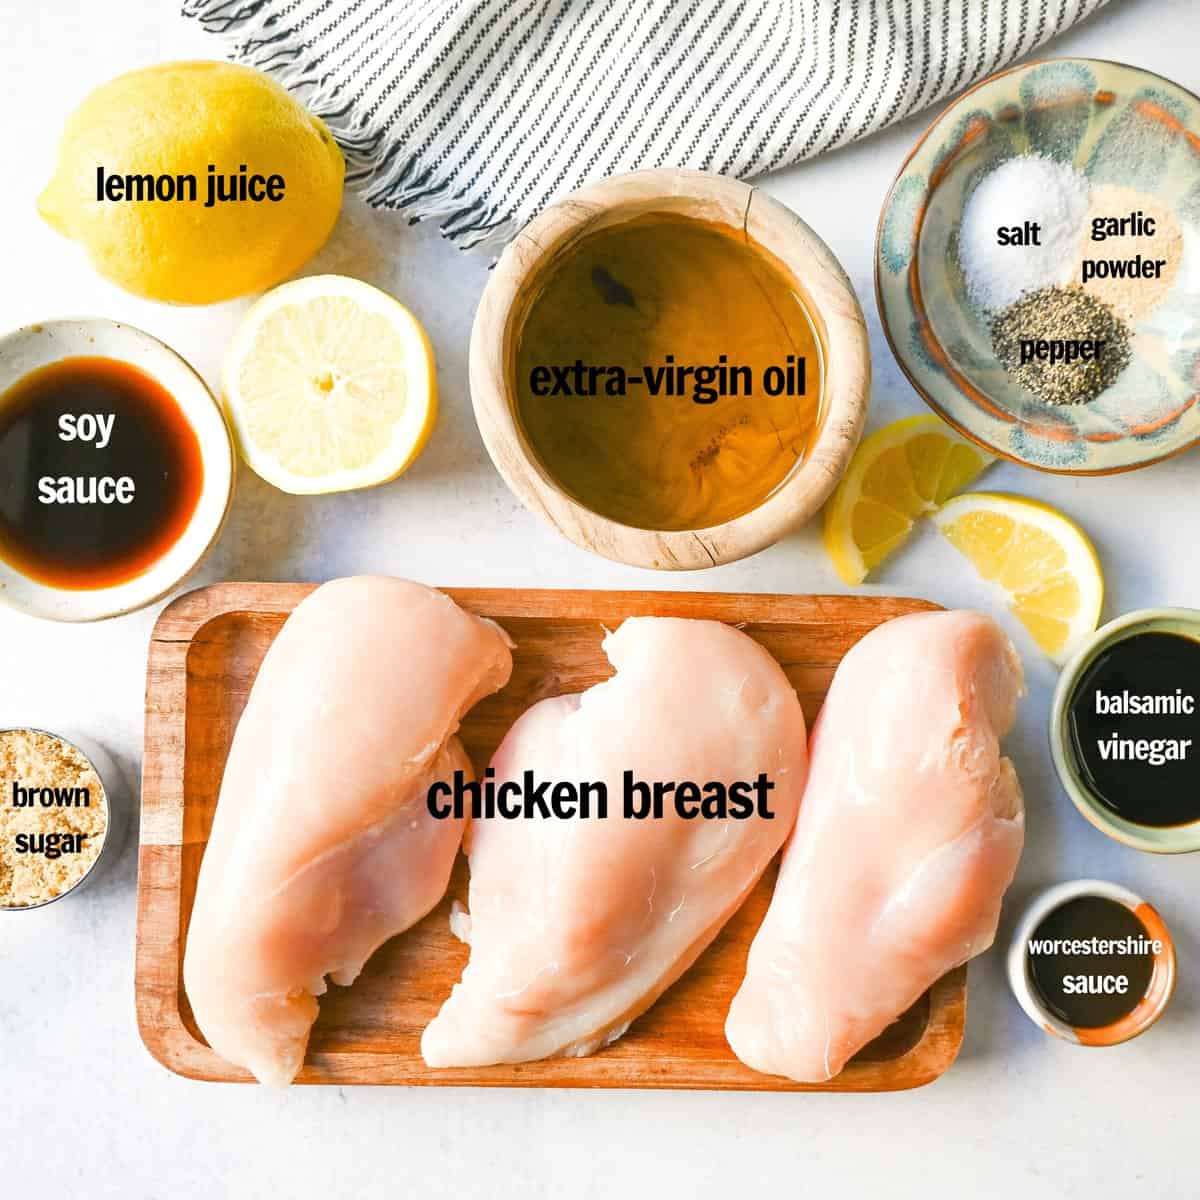 Best Chicken Marinade Ingredients. This Grilled Chicken Marinade Recipe is made with extra virgin olive oil, freshly squeezed lemon juice, balsamic vinegar, soy sauce, brown sugar,  Worcestershire sauce, garlic, salt, and pepper. You have such a variety of seasonings in this marinade.